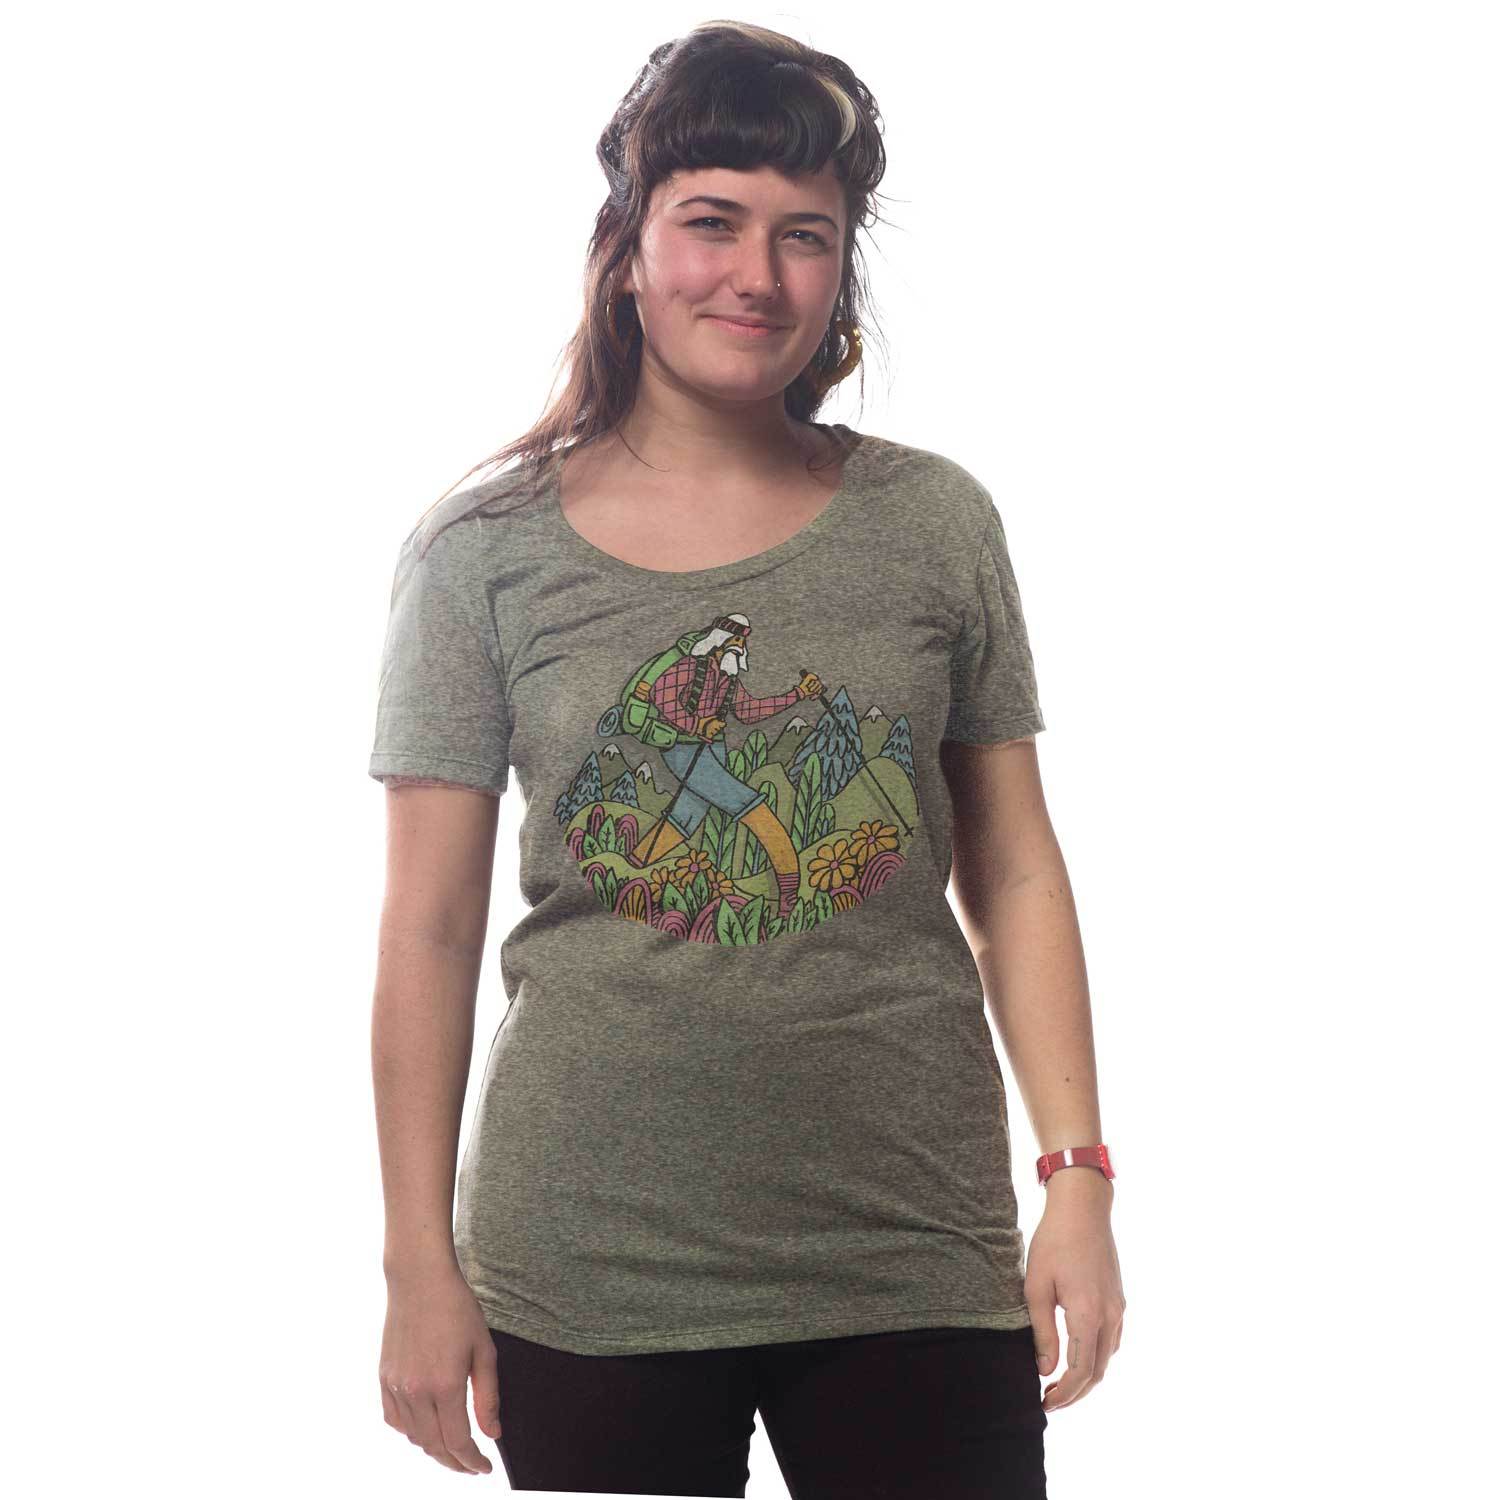 Women's Wise Hiker Vintage Graphic Tee | Retro Outdoorsy T-shirt | Solid Threads